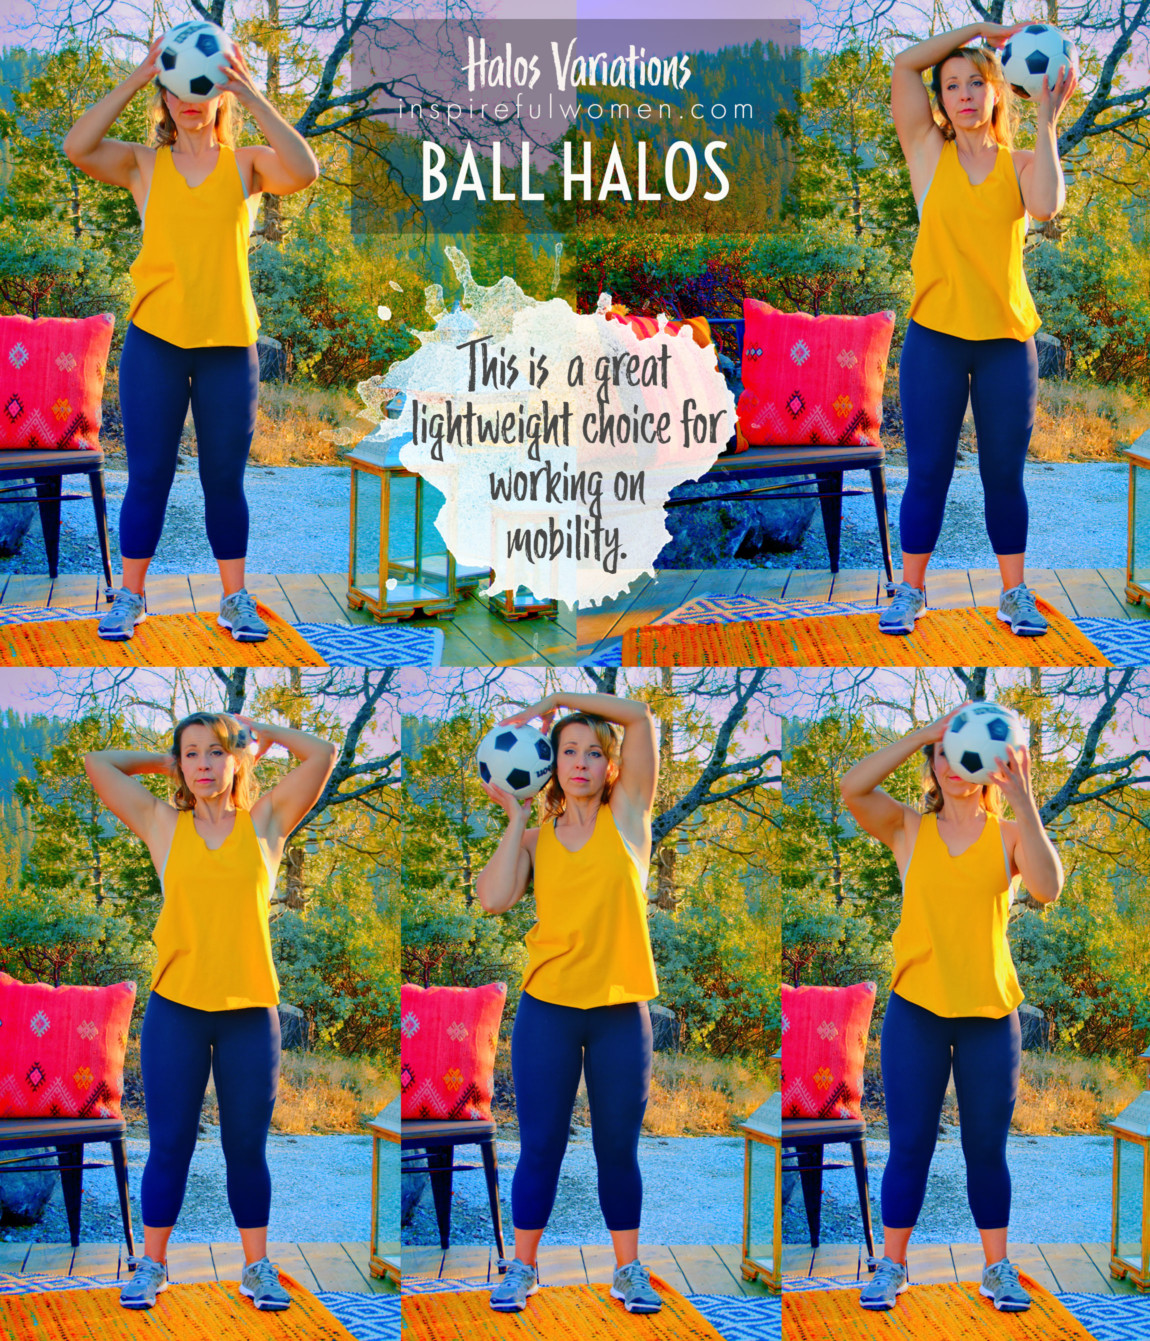 ball-halos-mobility-lightweight-exercise-variation